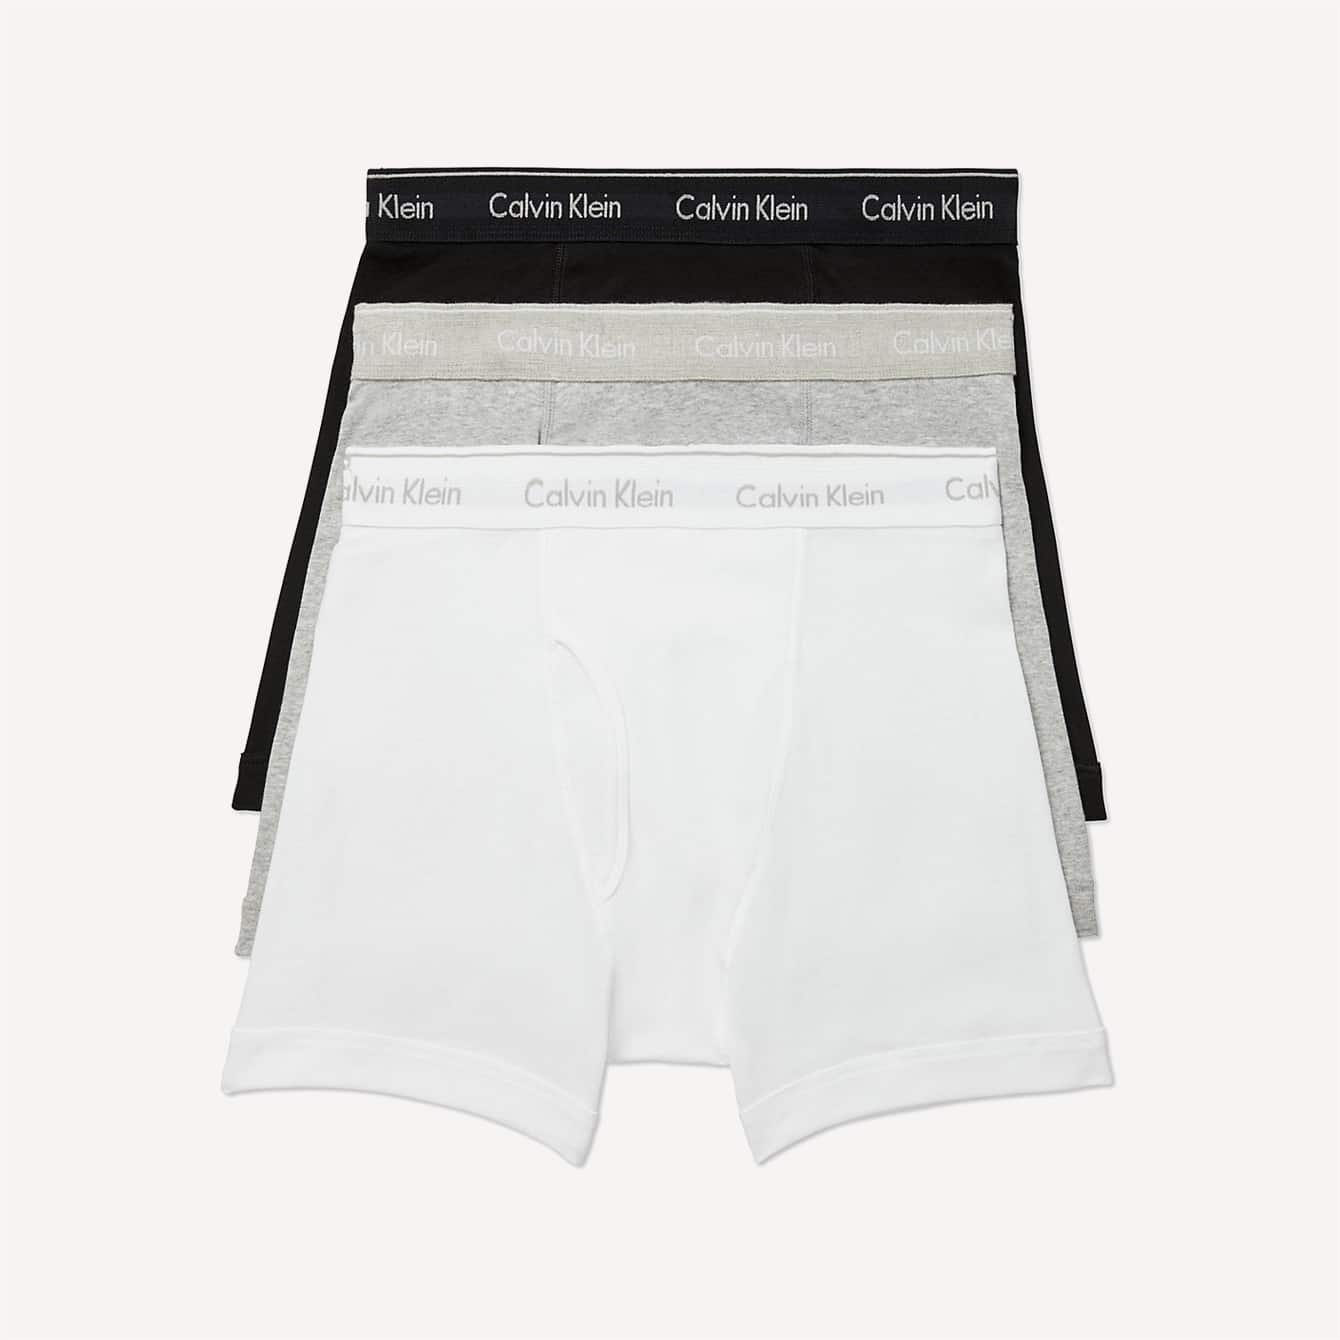 Here are the best boxer briefs of 2018 - AZ Big Media